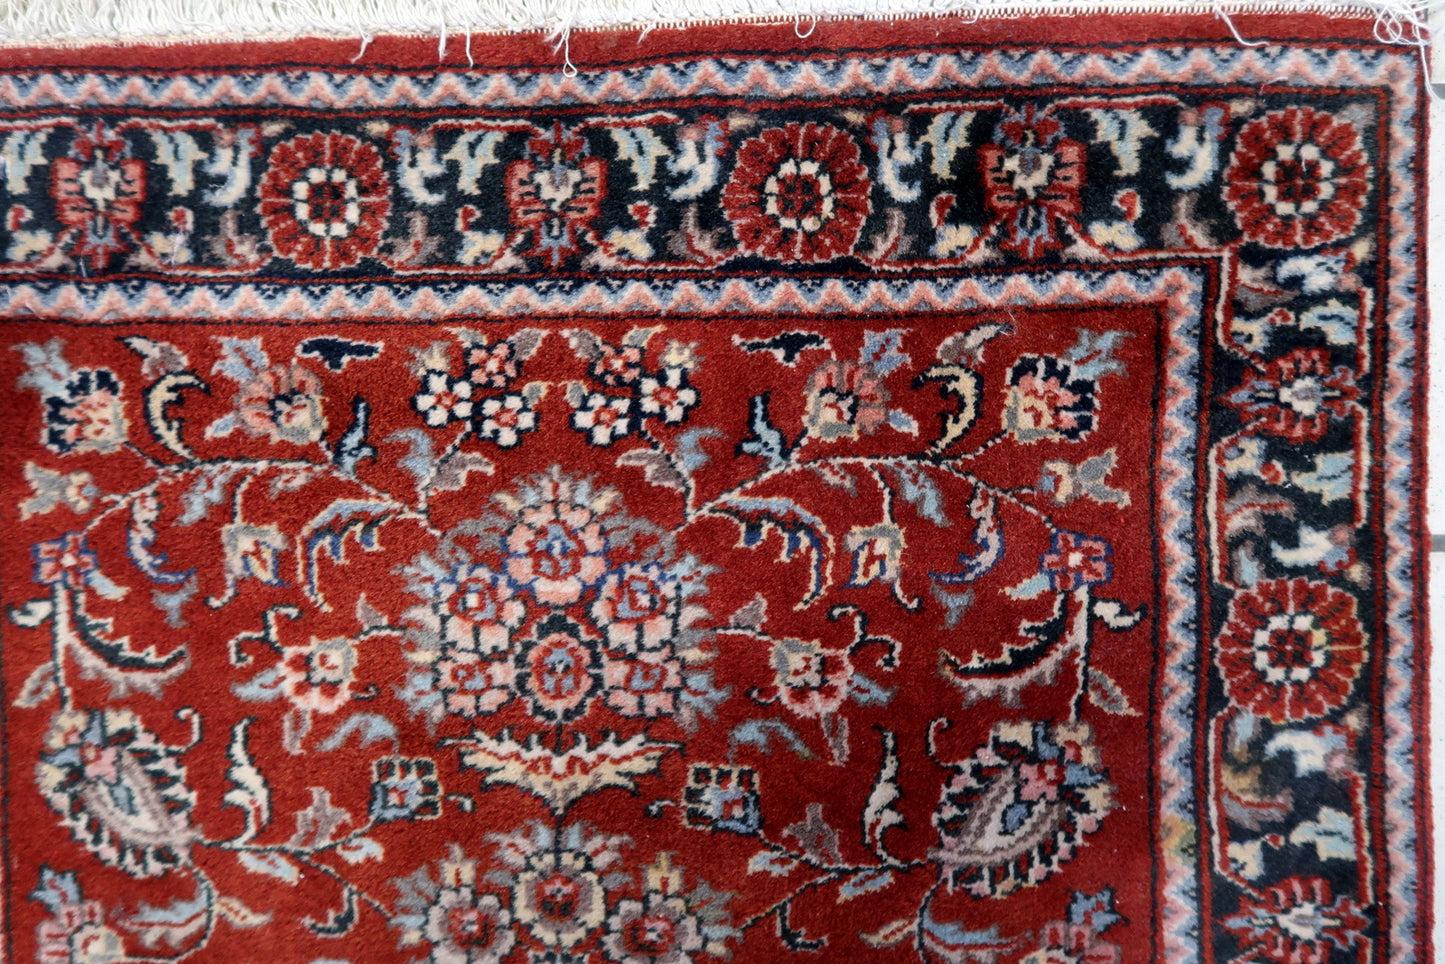 Close-up of the elegant arch-like design and delicate tassel motifs on the rug's surface